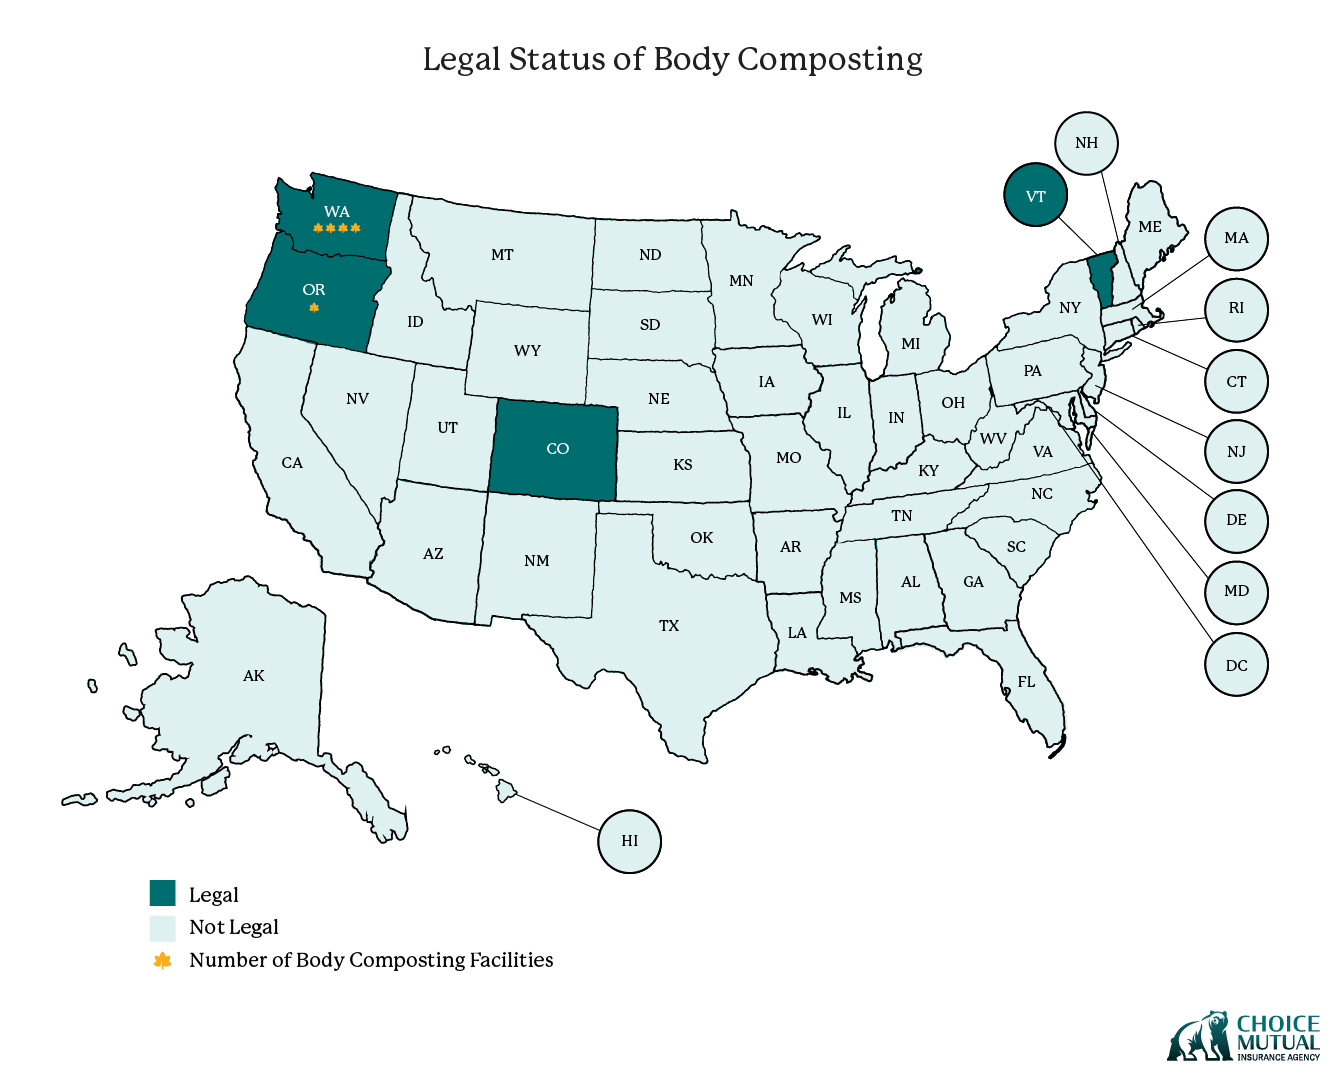 USA map showing the legality of body composting